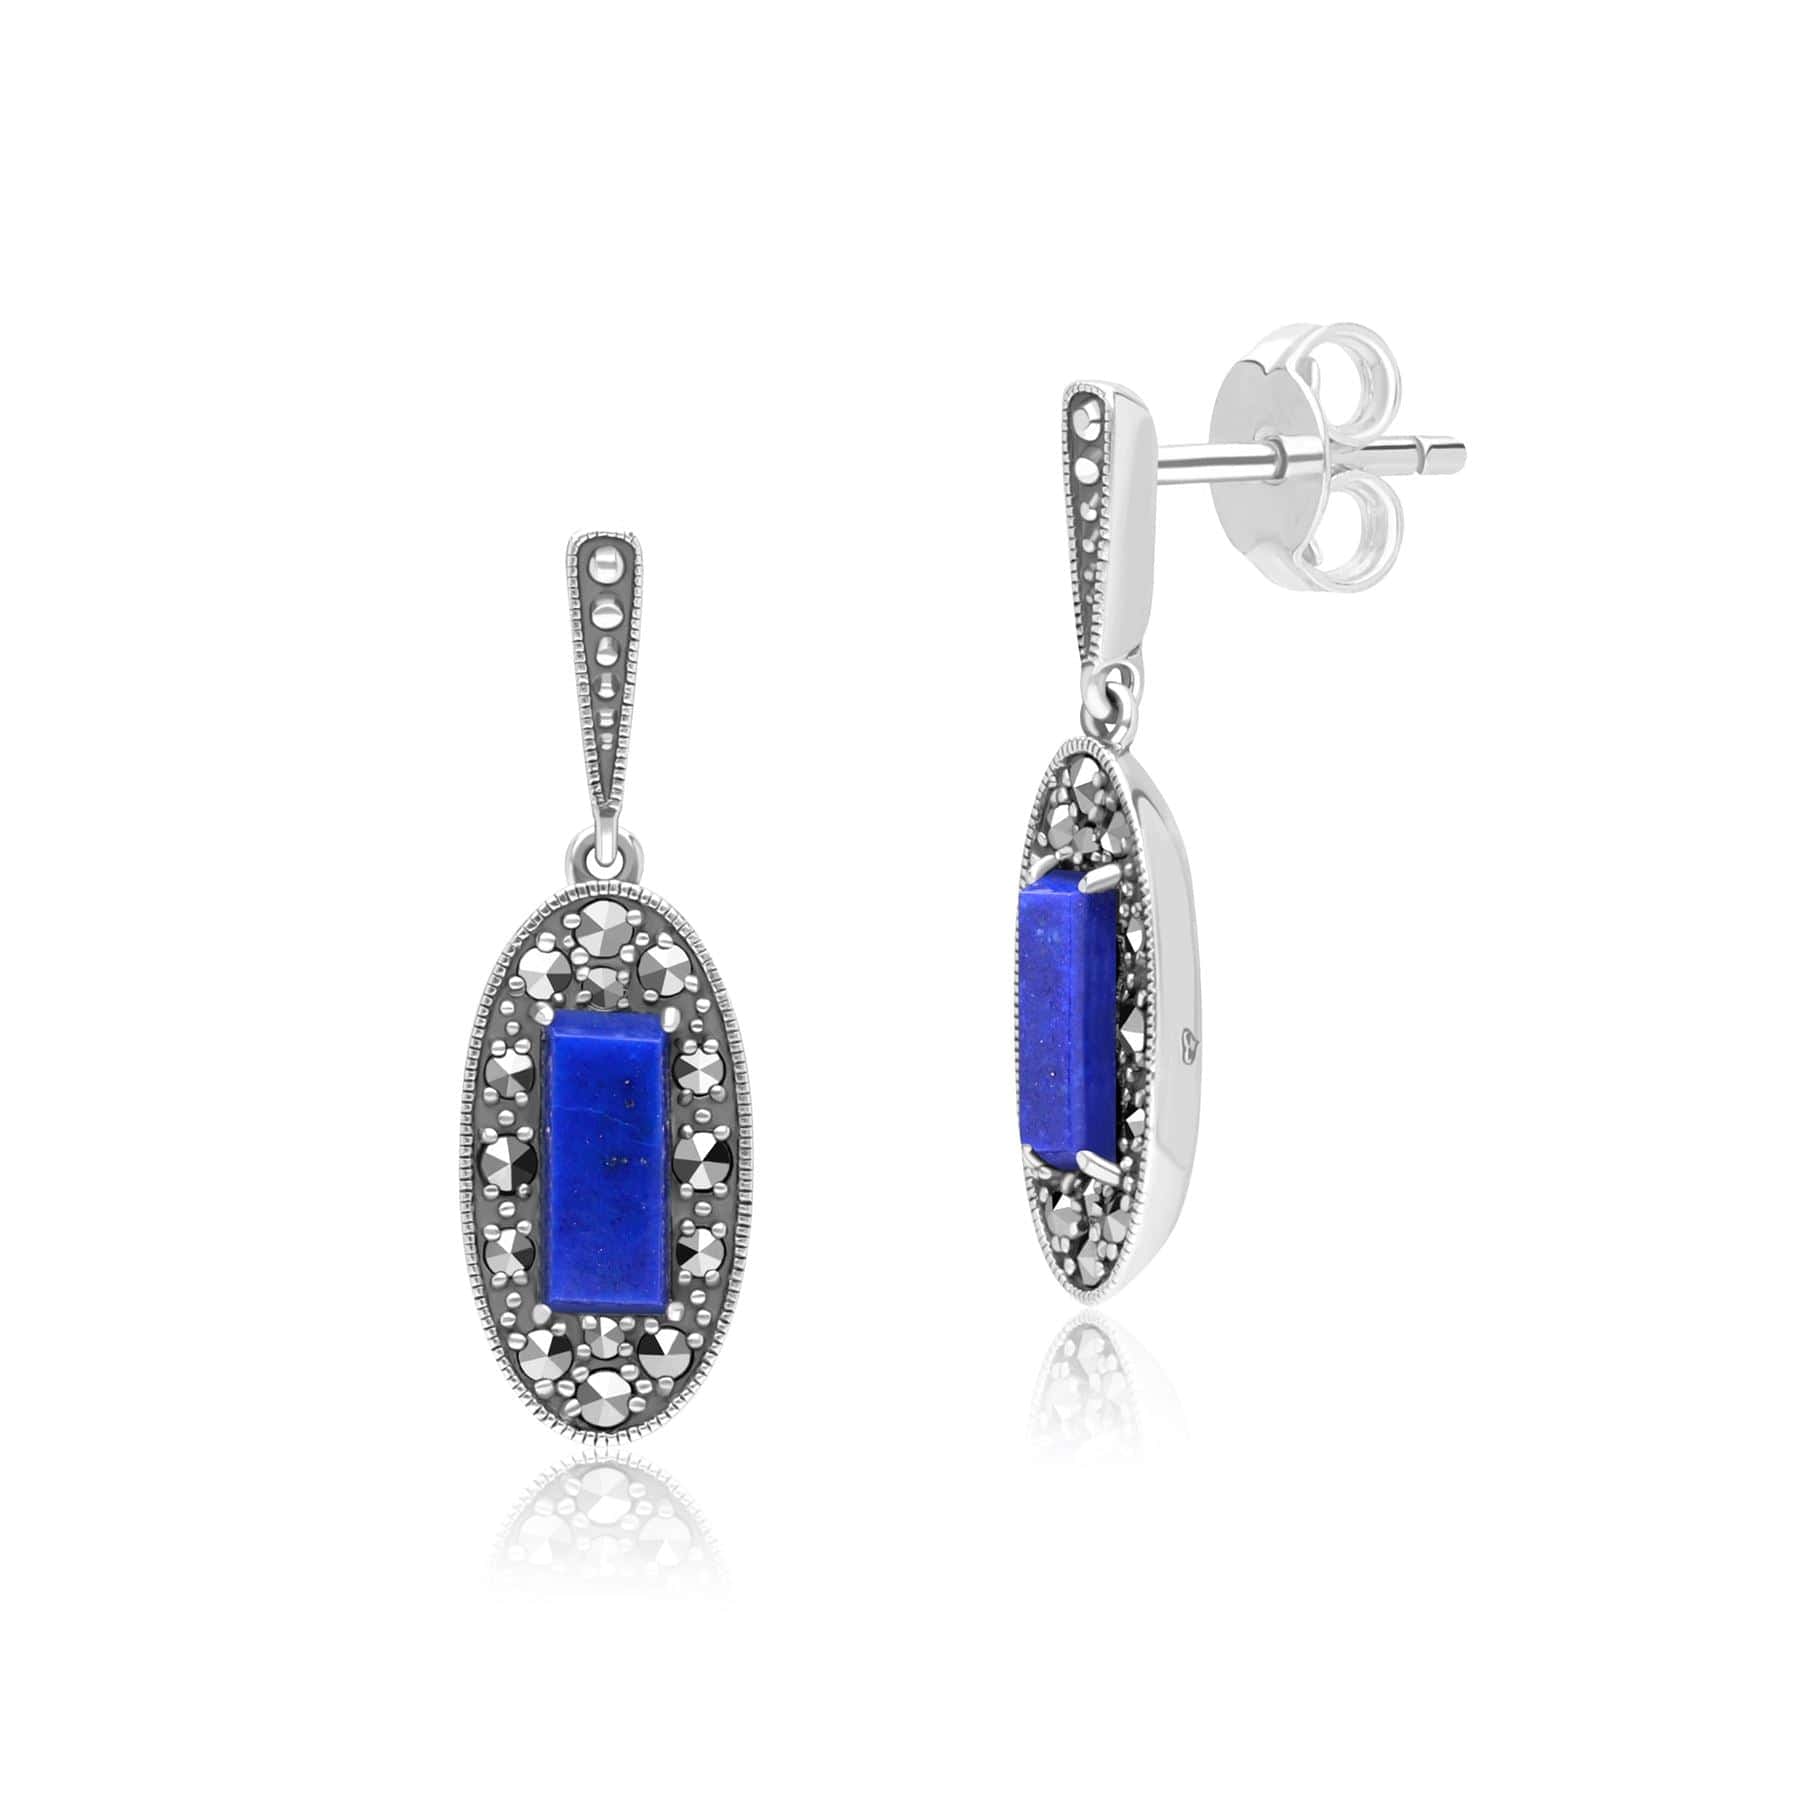 Art Deco Style Oval Lapis Lazuli and Marcasite Drop Earrings in Sterling Silver 214E936301925 